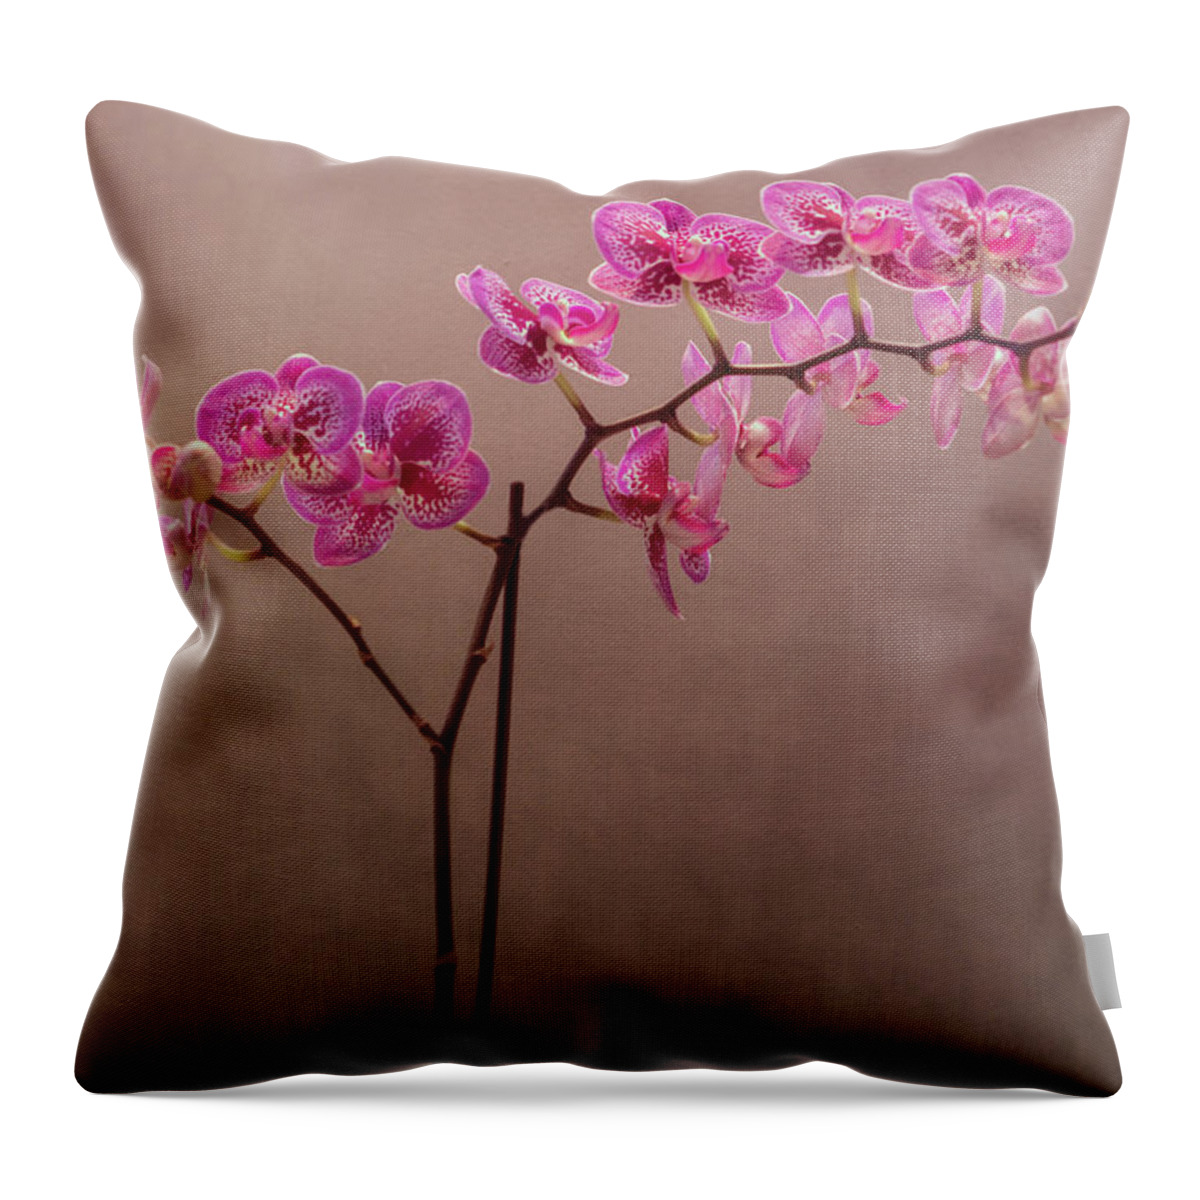 Floral Throw Pillow featuring the photograph Orchid 6 by Rosette Doyle